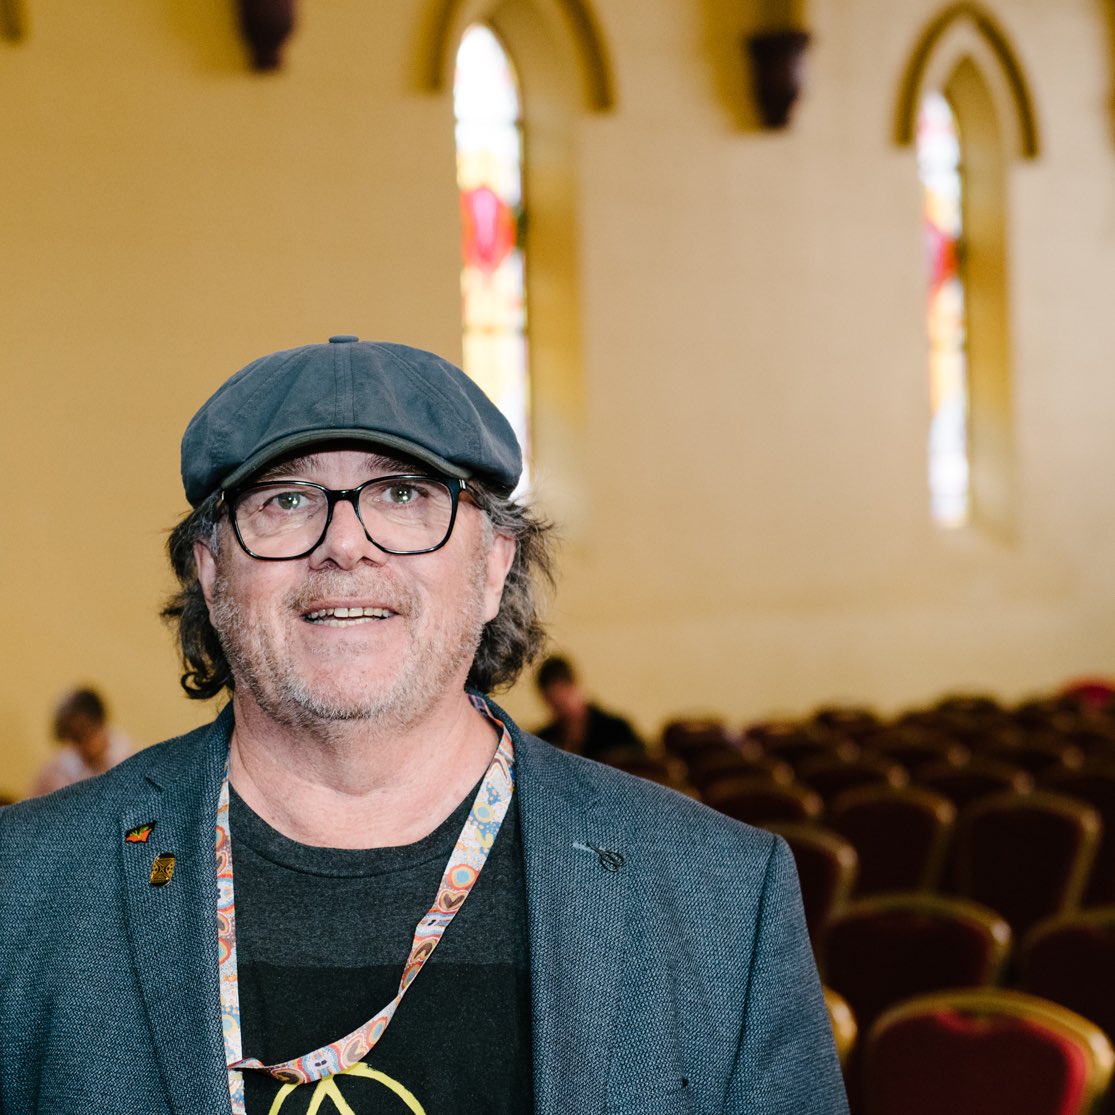 Head and shoulders shot of Professor Maynard smiling in Empire Church Theatre with stained glass windows, Toowoomba